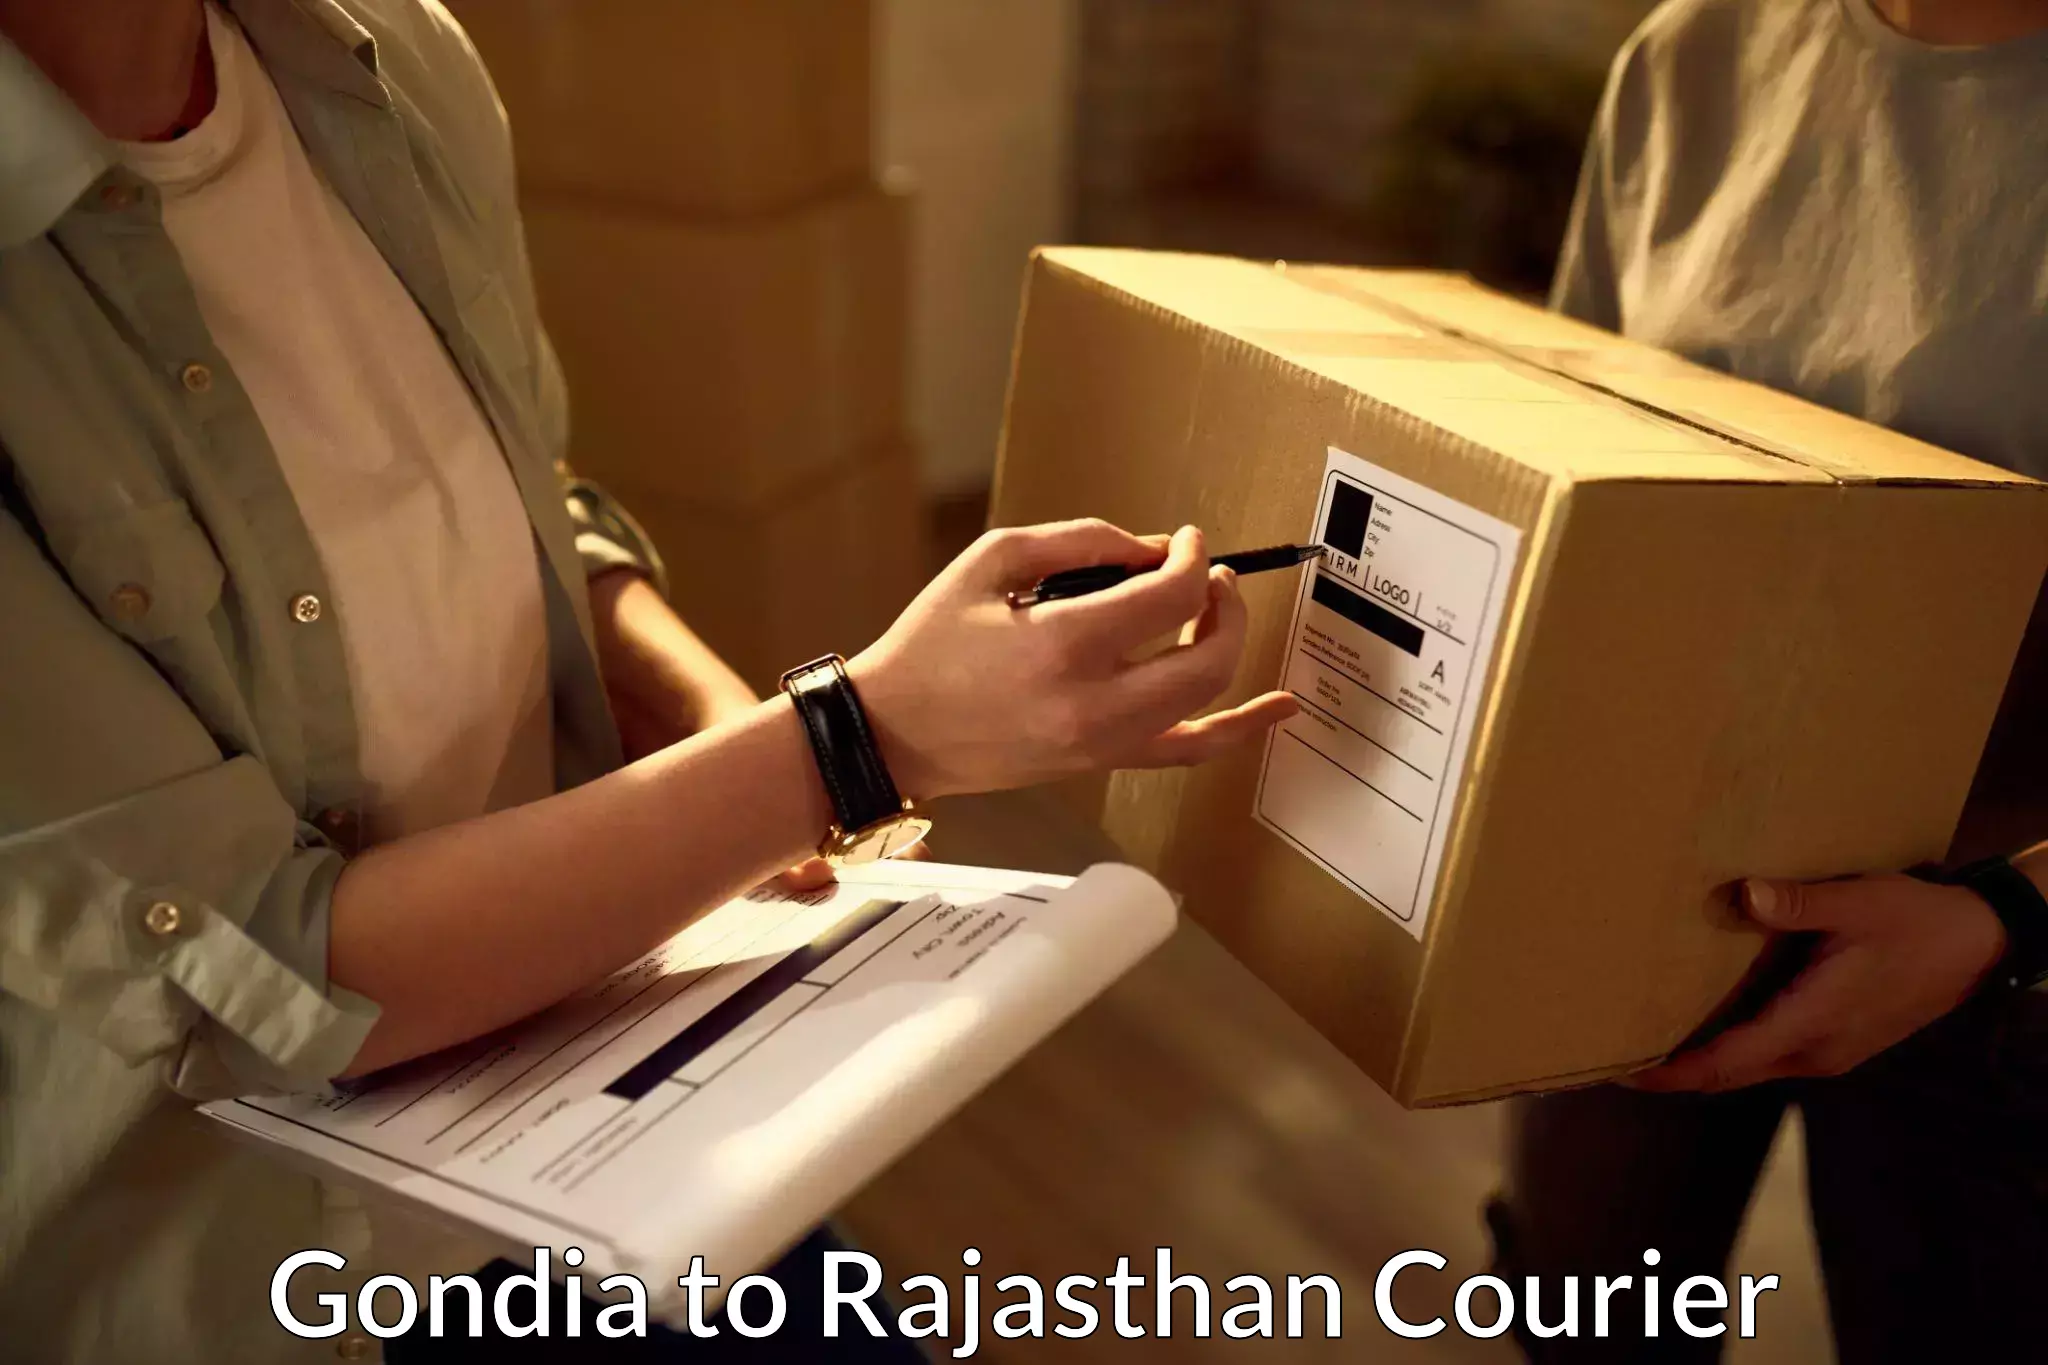 Global courier networks Gondia to Jhalawar